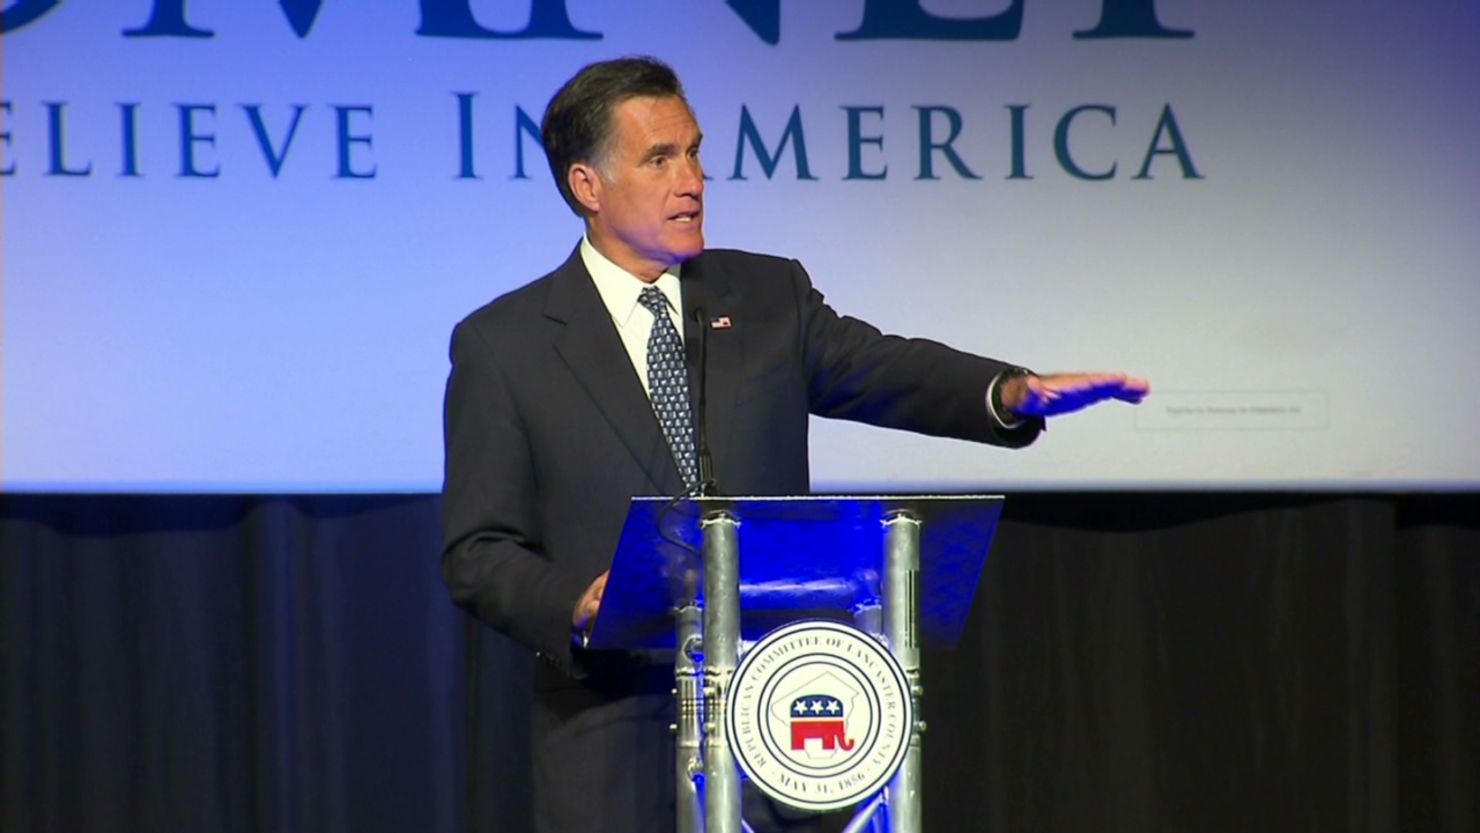 Mitt Romney, the presumptive GOP nominee, now gets to run the general election campaign he has hoped for.